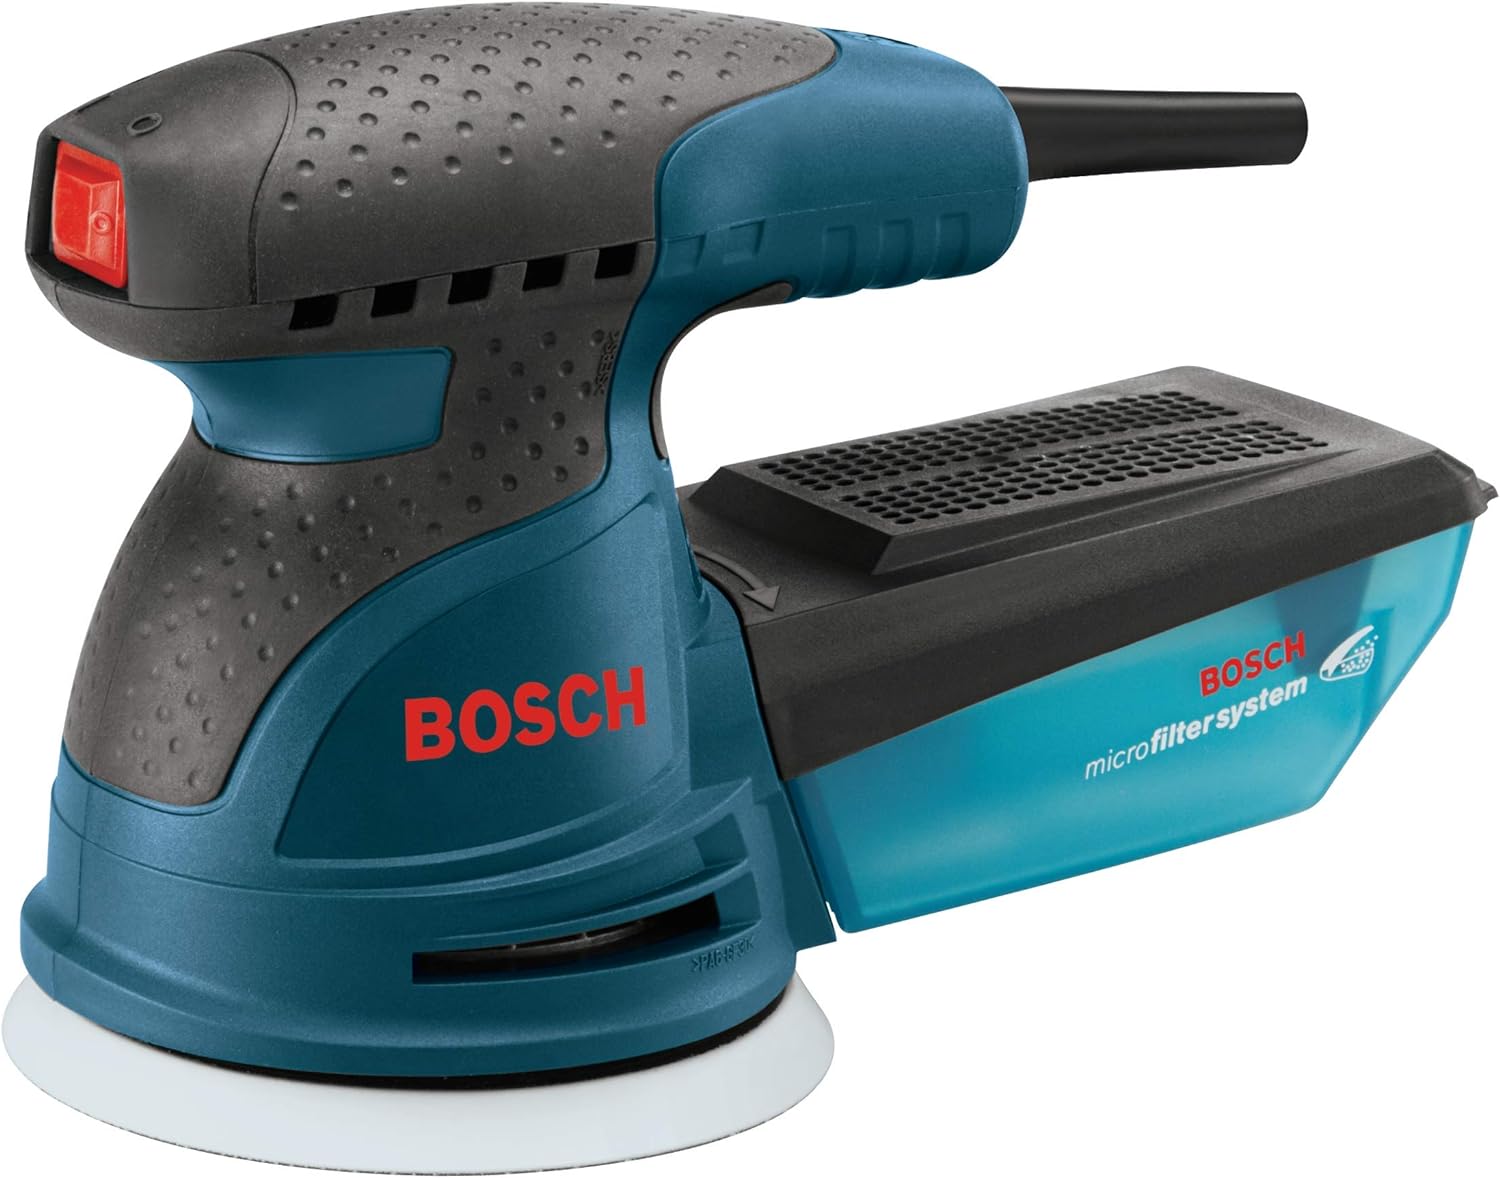 Bosch ROS20VSC Palm Sander 2.5 Amp 5 In. Corded Variable Speed Random Orbital Sander/Polisher Kit with Dust Collector and Soft Carryi